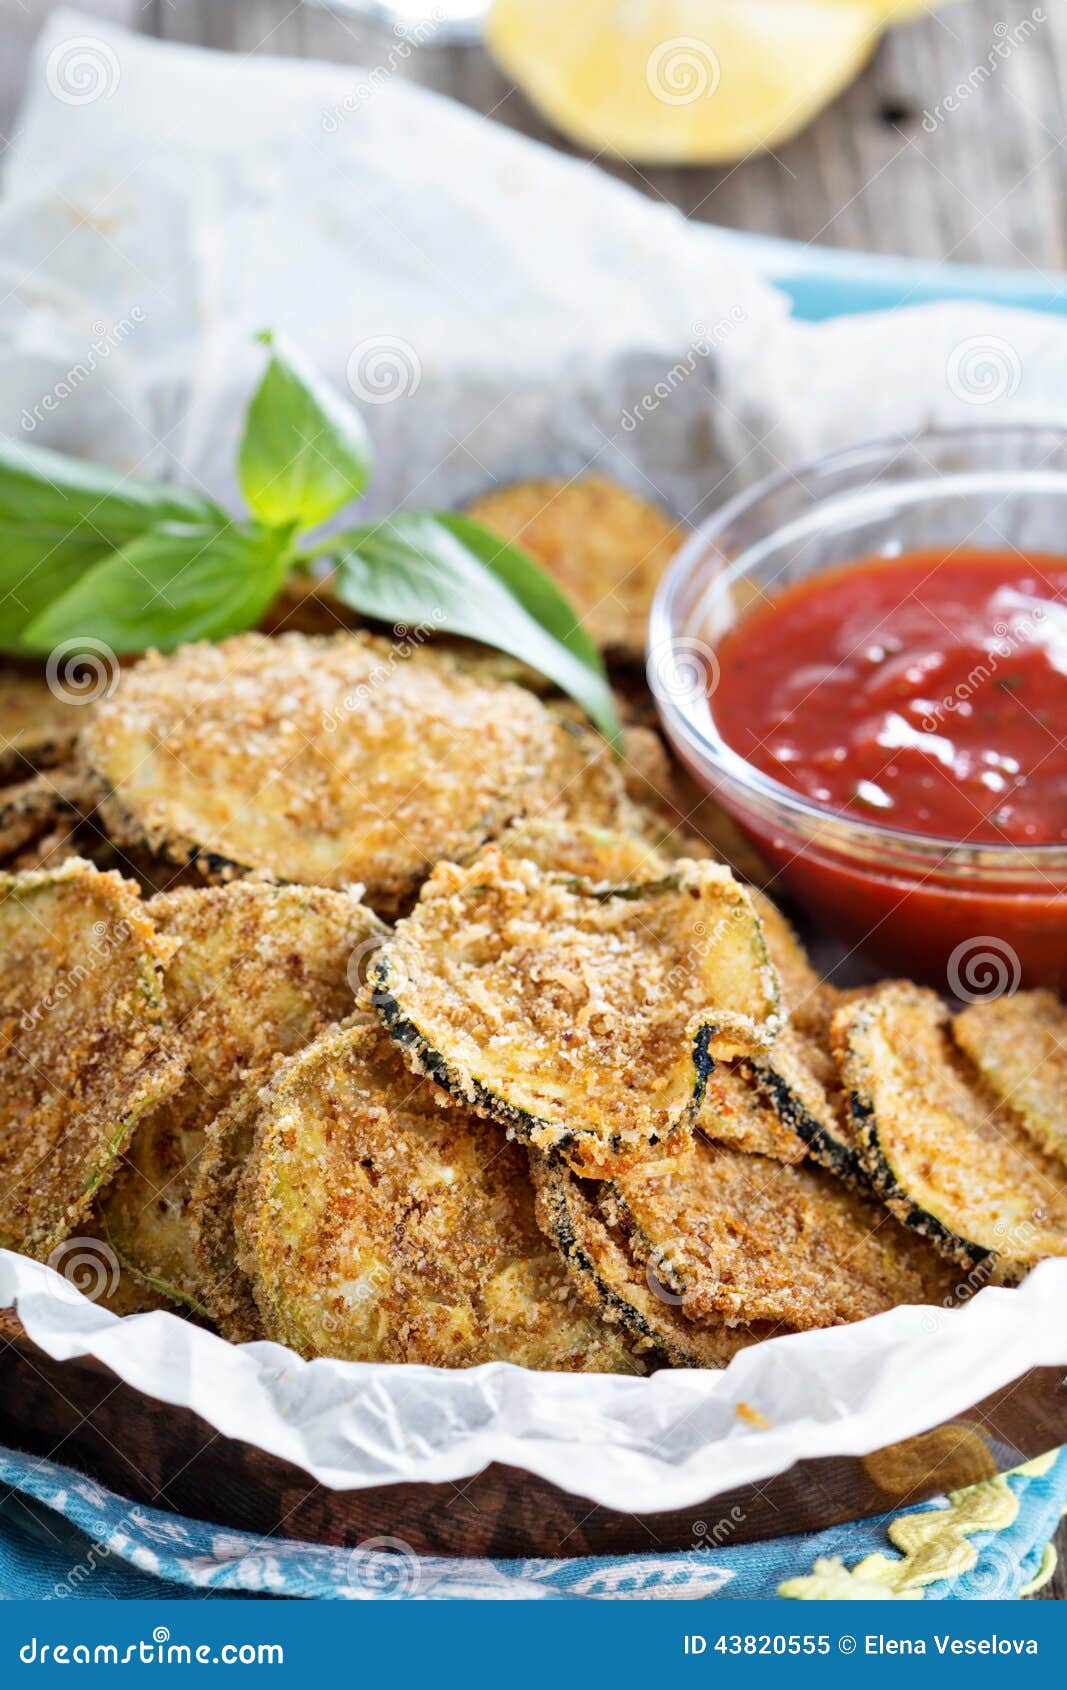 Homemade zucchini chips stock image. Image of calories - 43820555